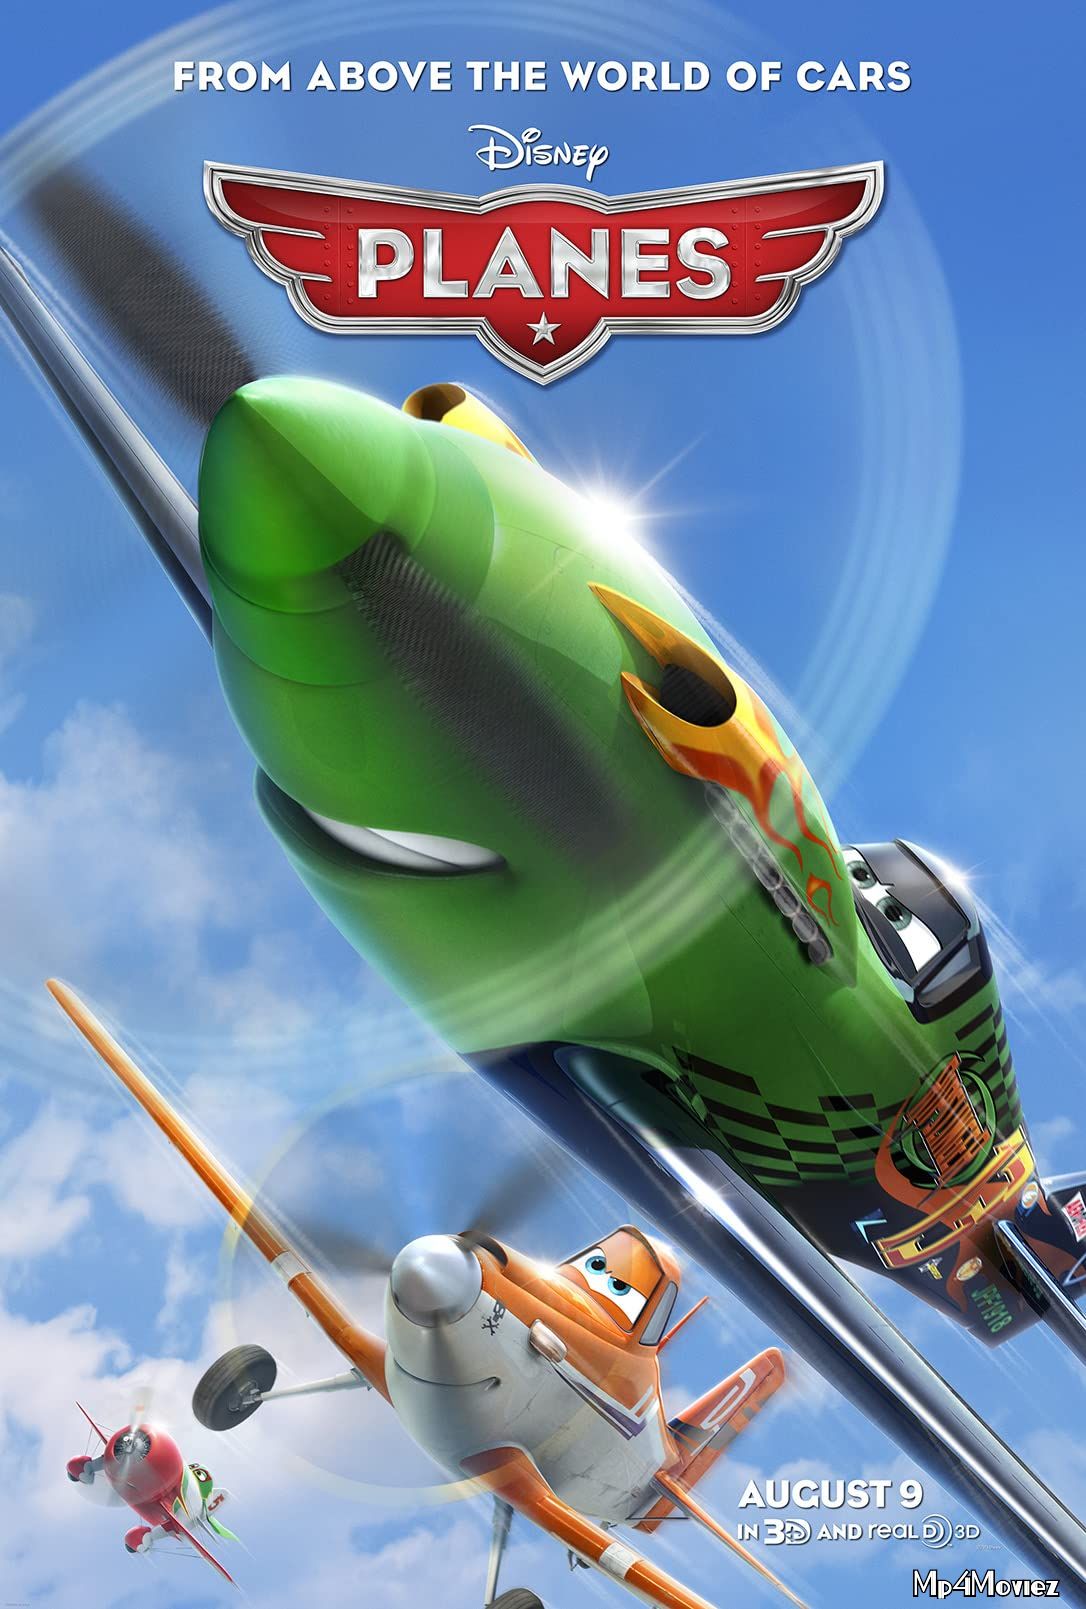 Planes 2013 Hindi Dubbed Movie download full movie